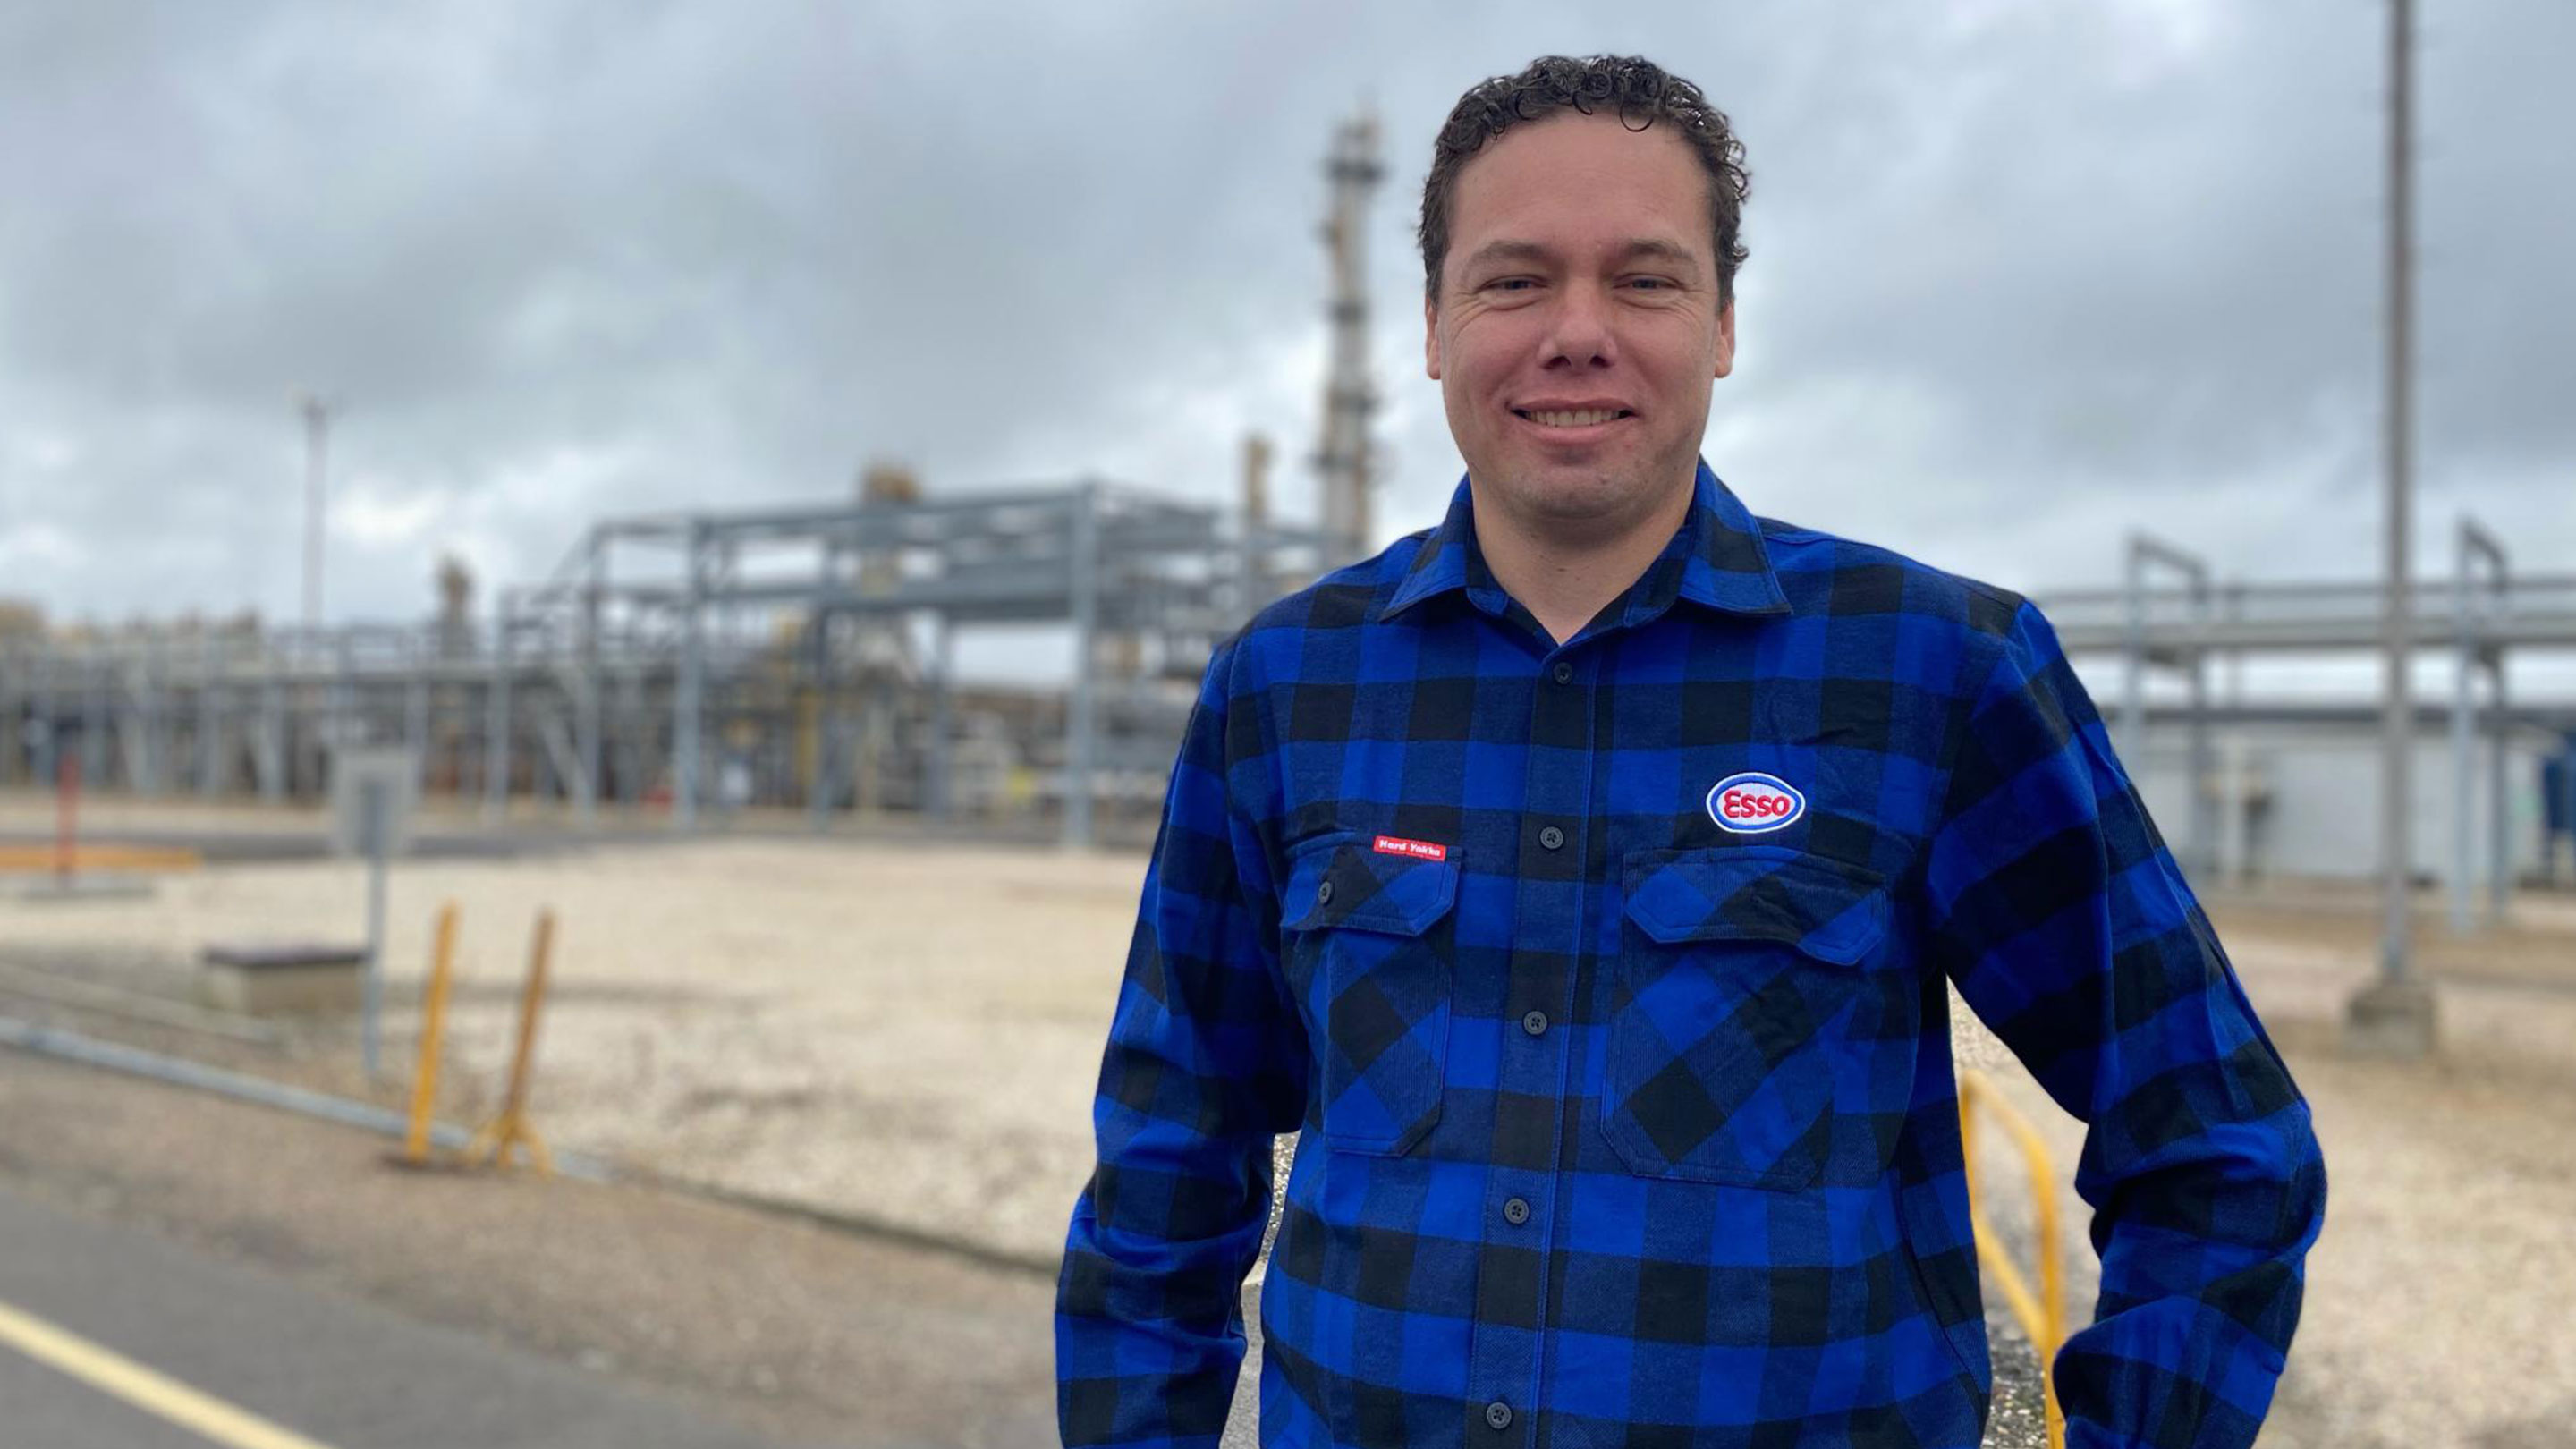 Image Longford Plants Manager, Clinton Gentle, is transitioning to his new role, as our reliable supply of Gippsland gas to Australians is more critical than ever.